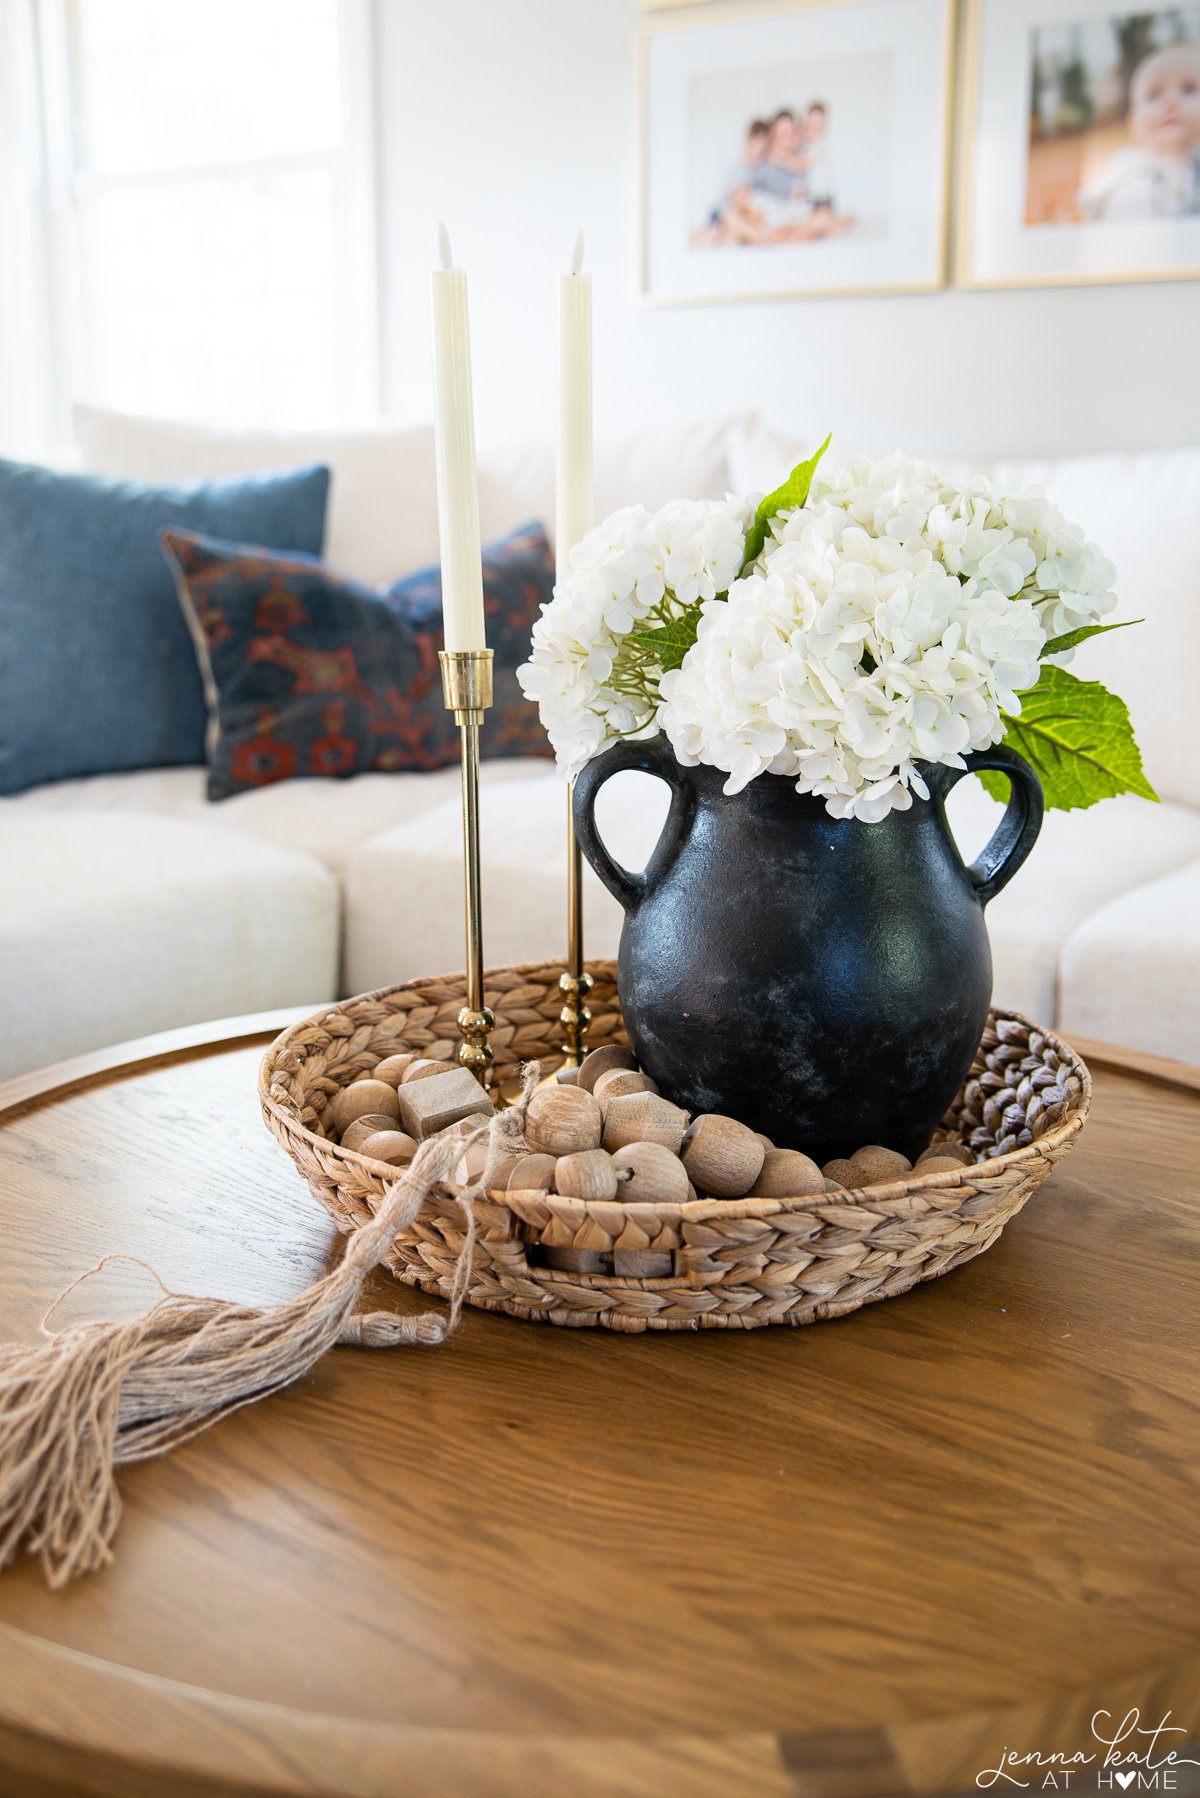 White Faux Flowers in a black vase displayed on a center coffee table.